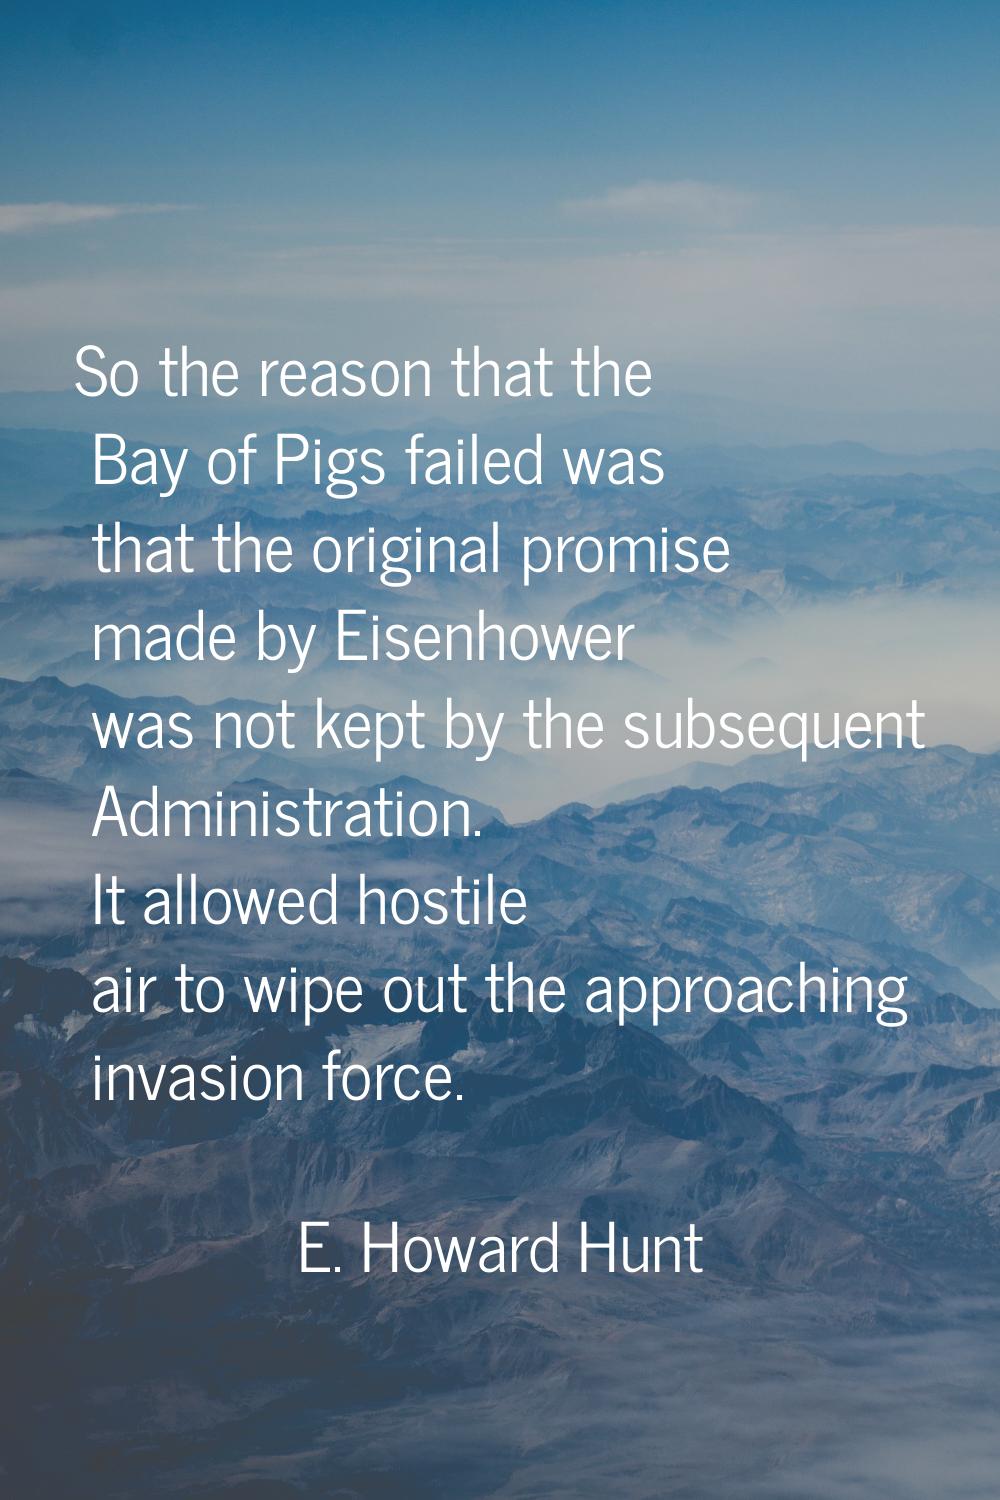 So the reason that the Bay of Pigs failed was that the original promise made by Eisenhower was not 